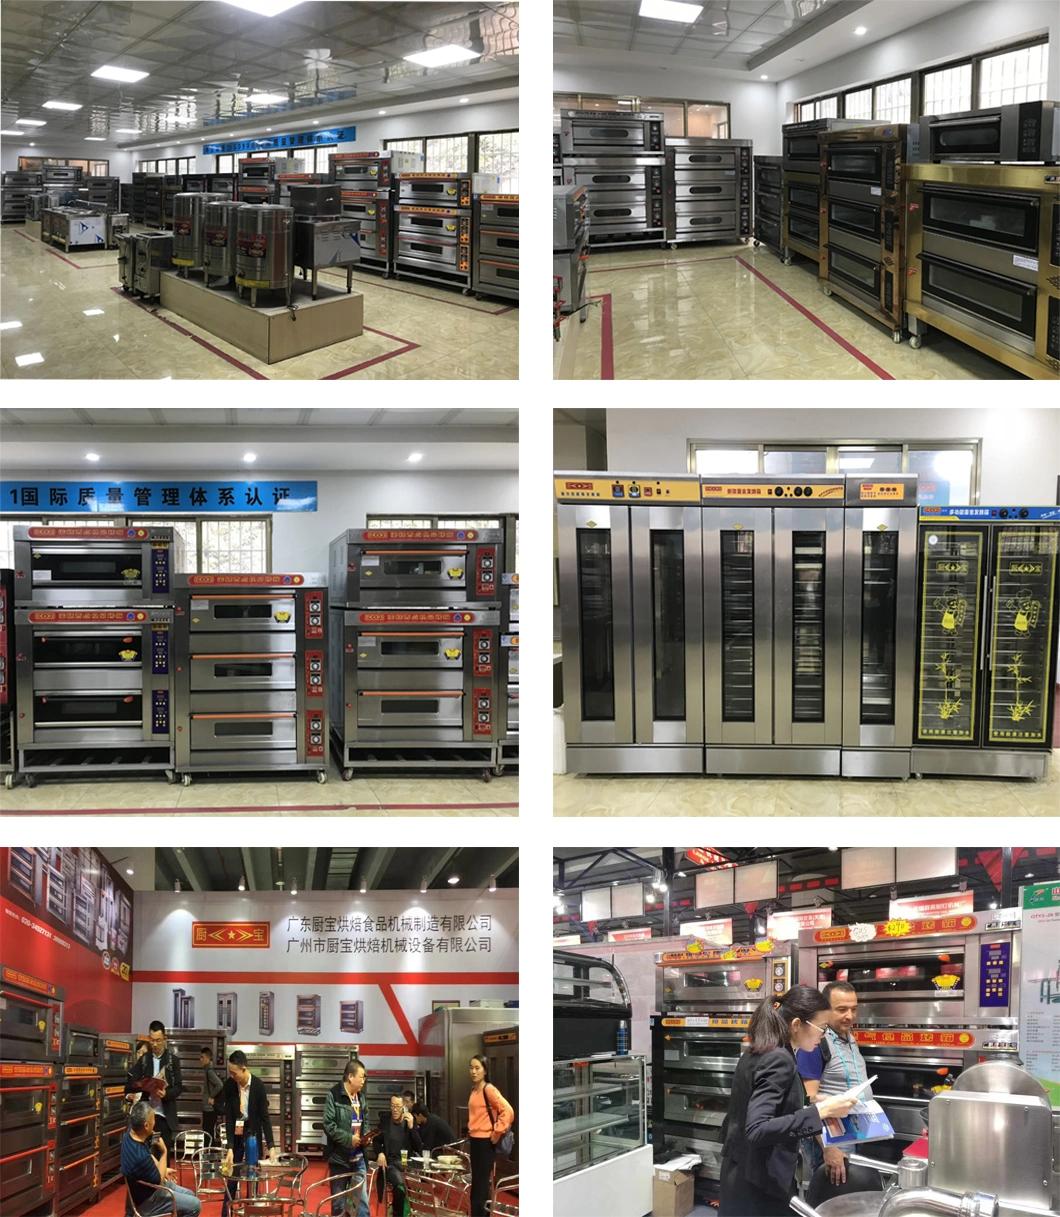 Commercial Kitchen 4 Deck 16 Trays Electric Oven for Restaurant Baking Equipment Bakery Machinery Food Machine